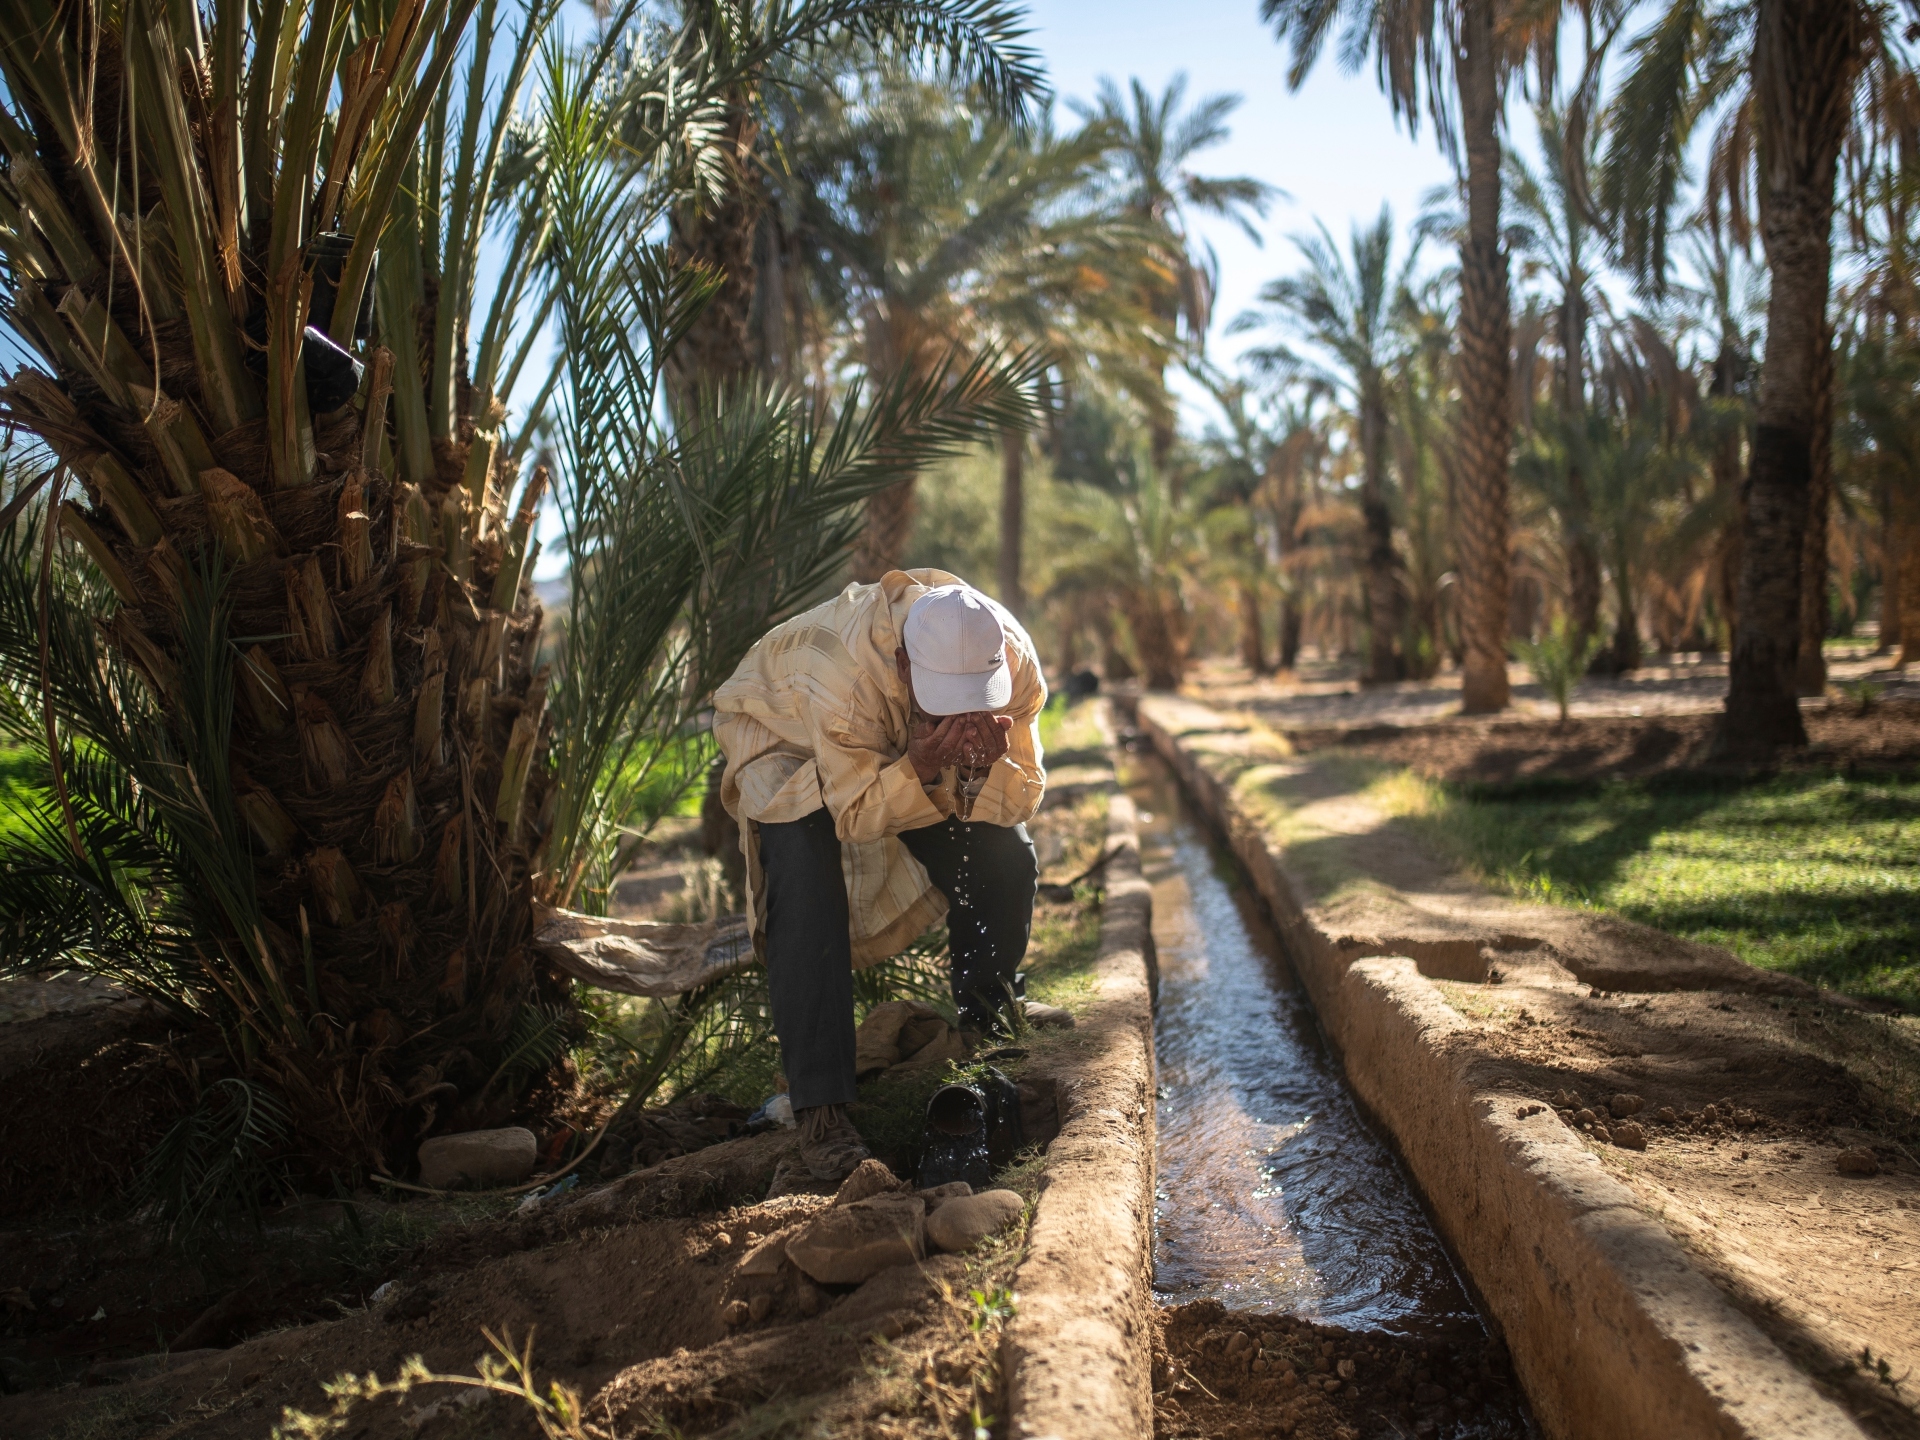 Photos: Climate crisis threatens centuries-old oases in Morocco